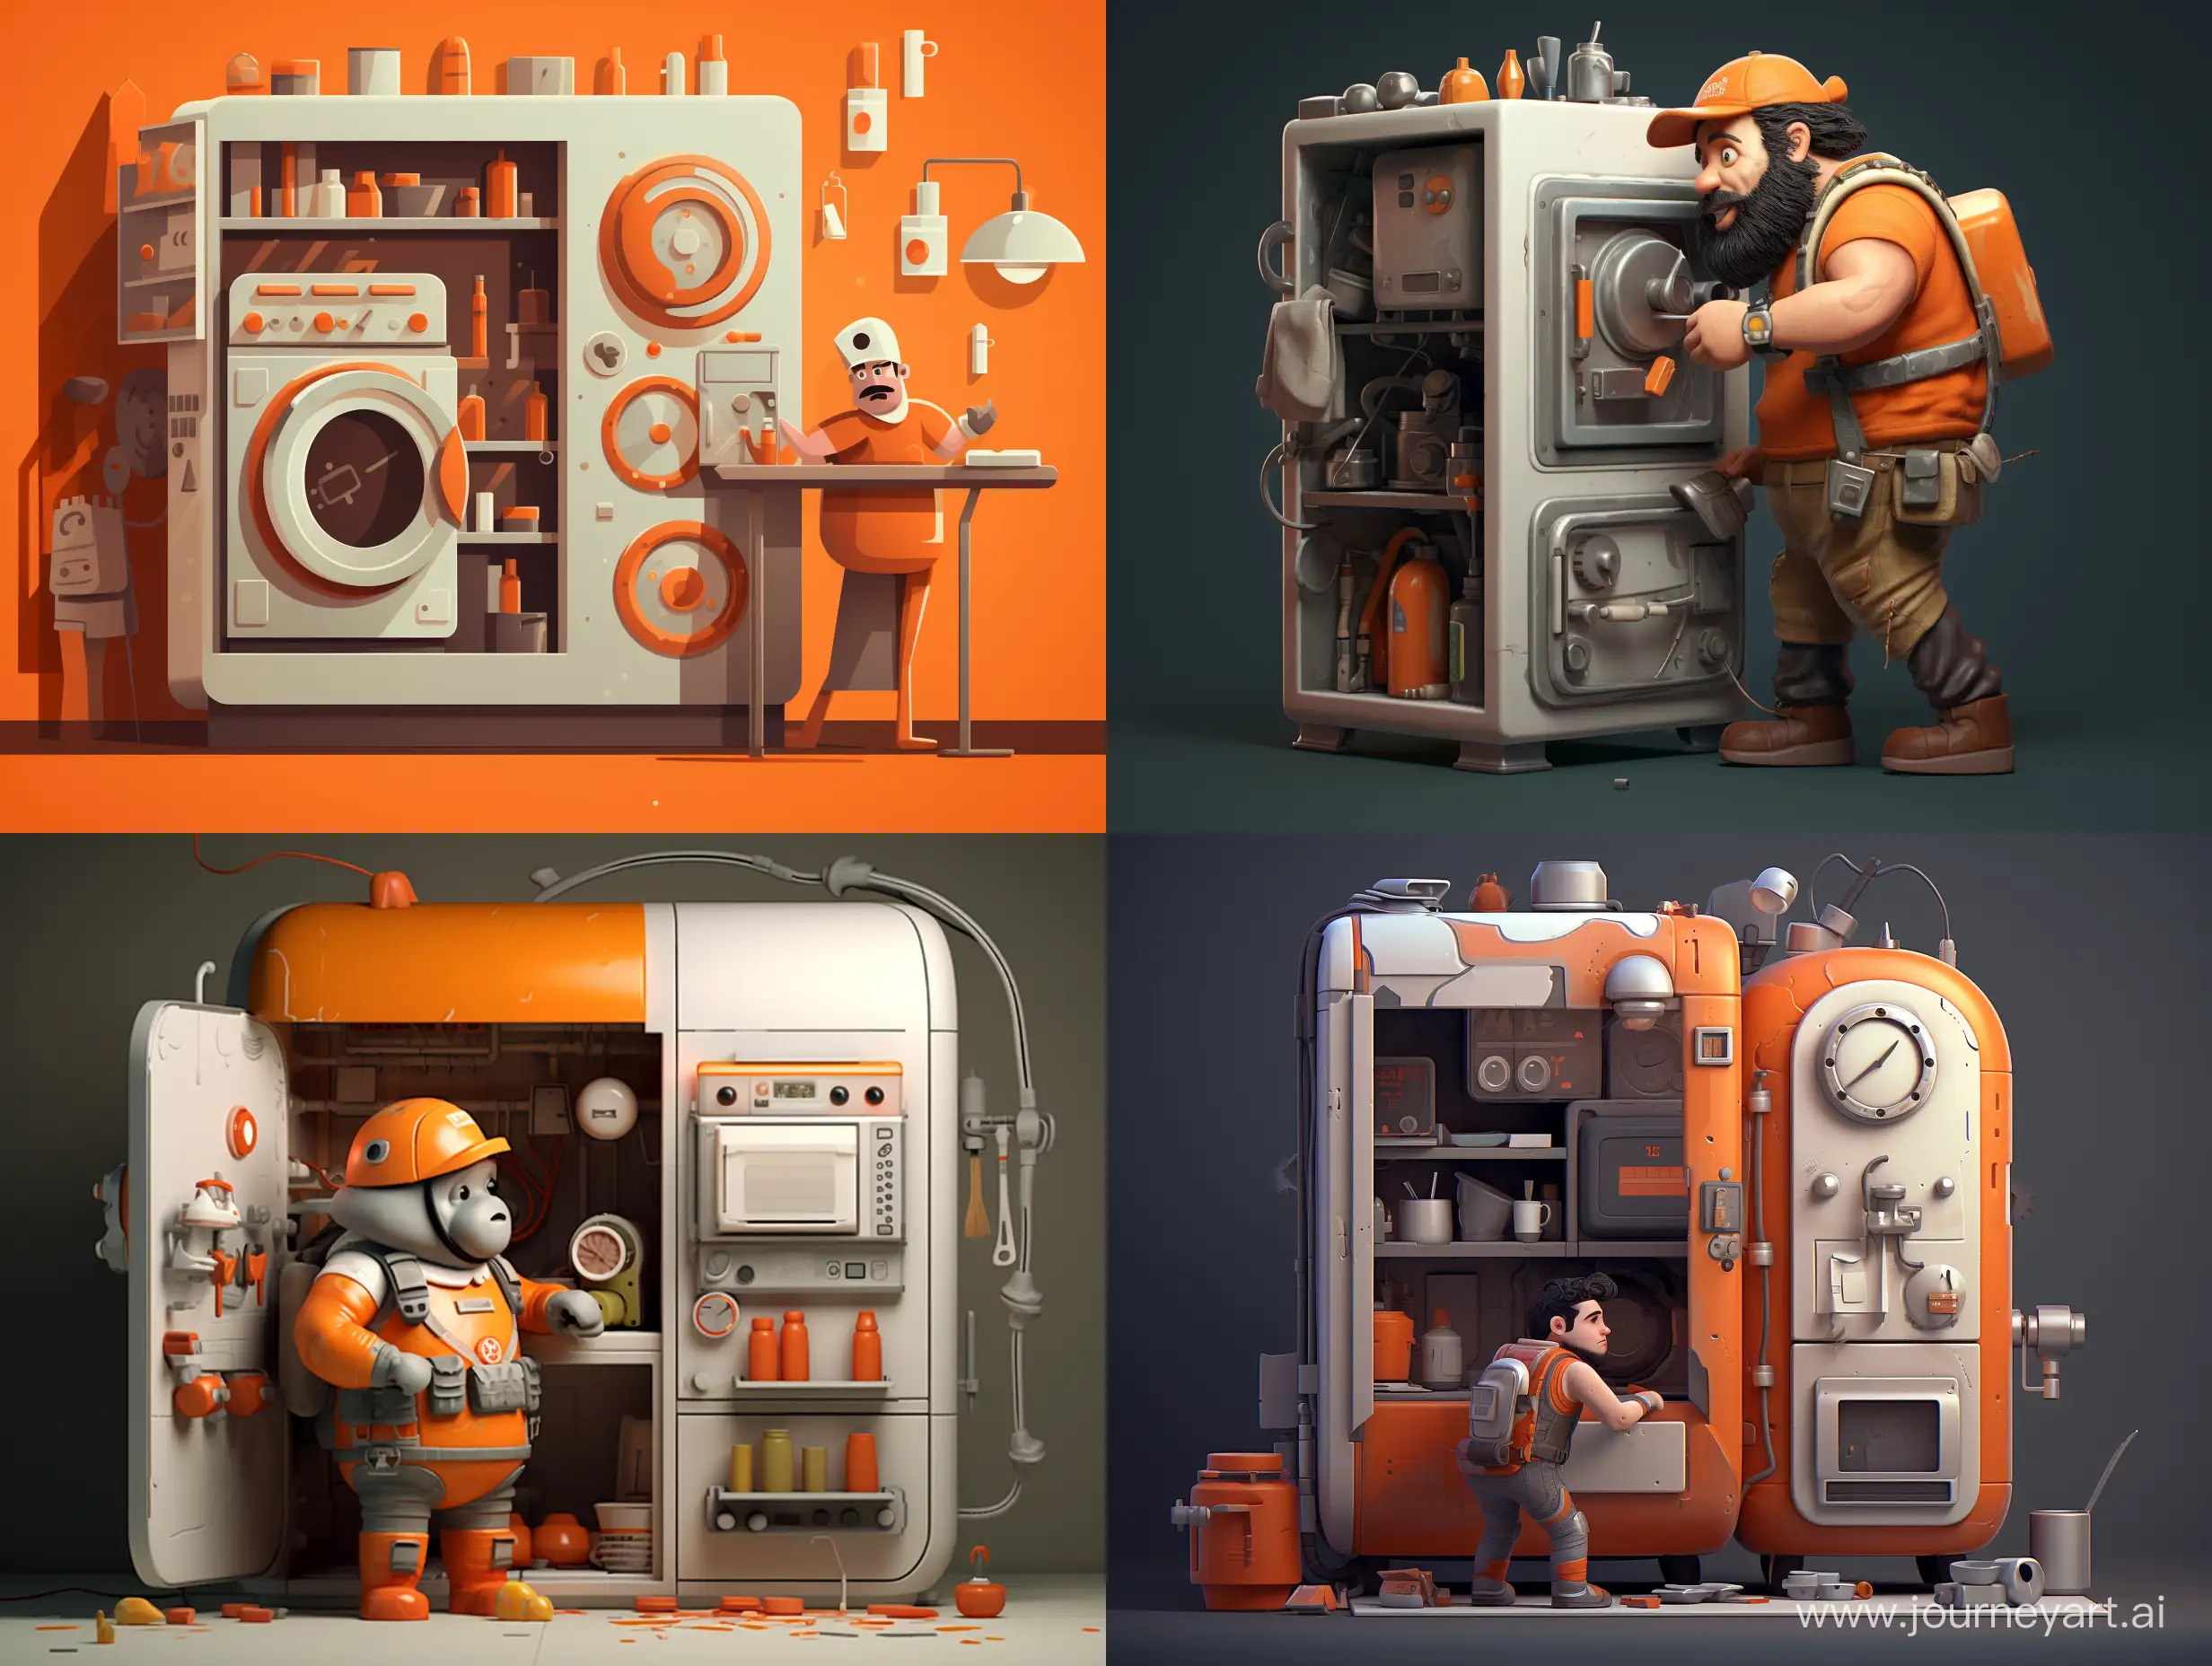 An animated repairman repairing a refrigerator wearing a gray and orange 